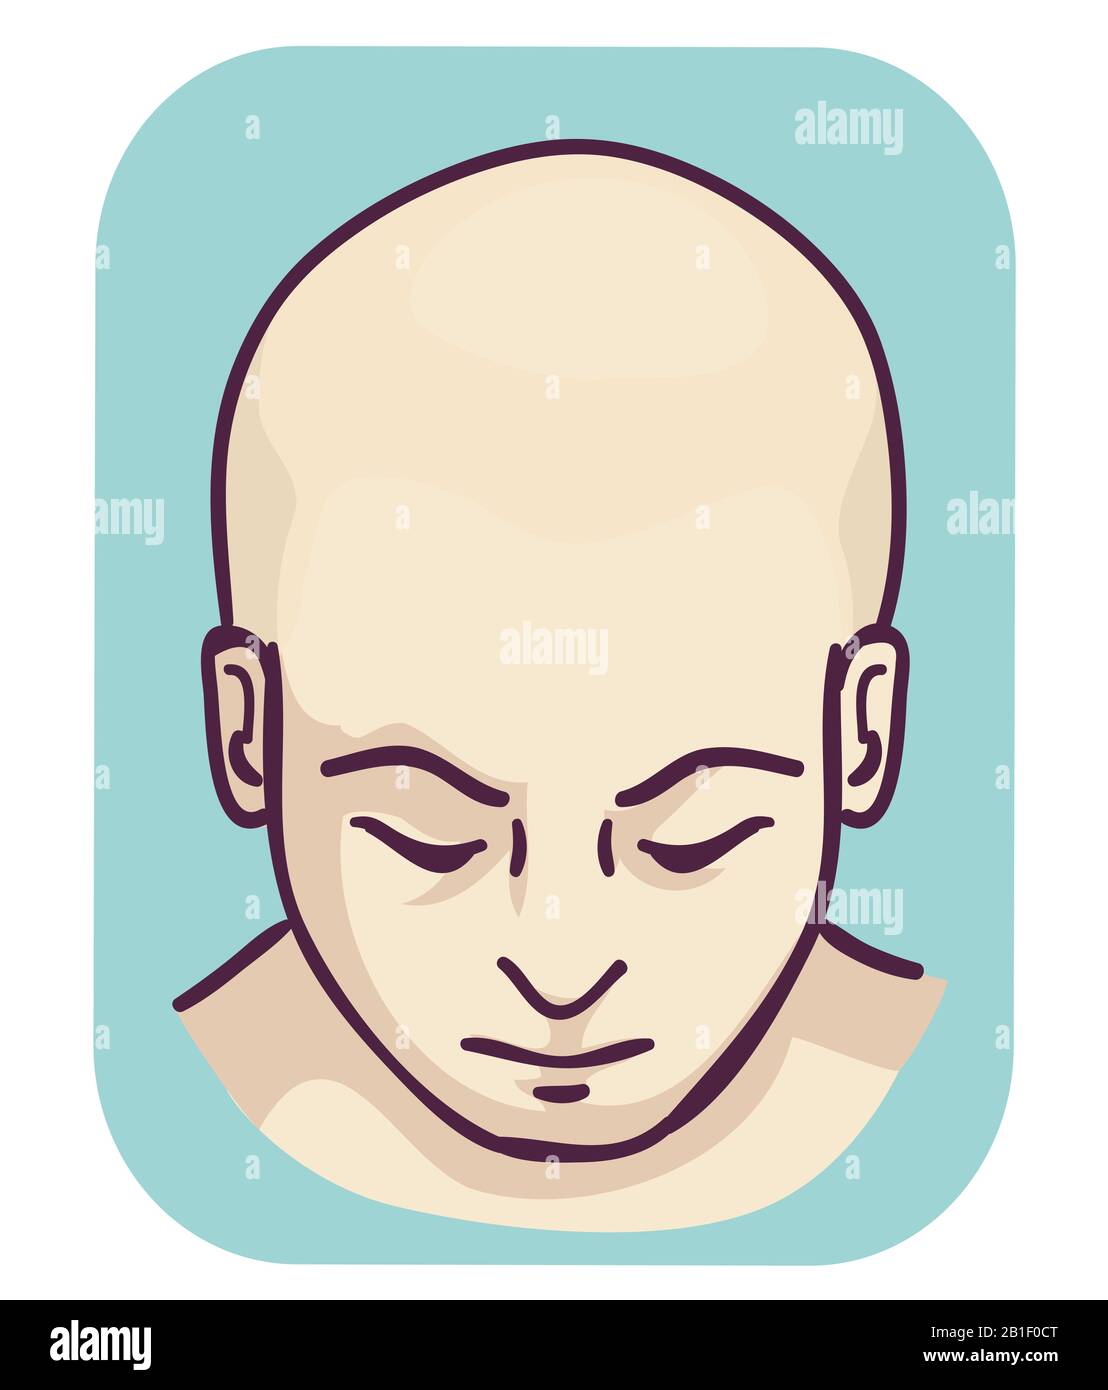 Illustration of a Man Showing a Bald Head, Full Head Hair Loss Stock Photo  - Alamy